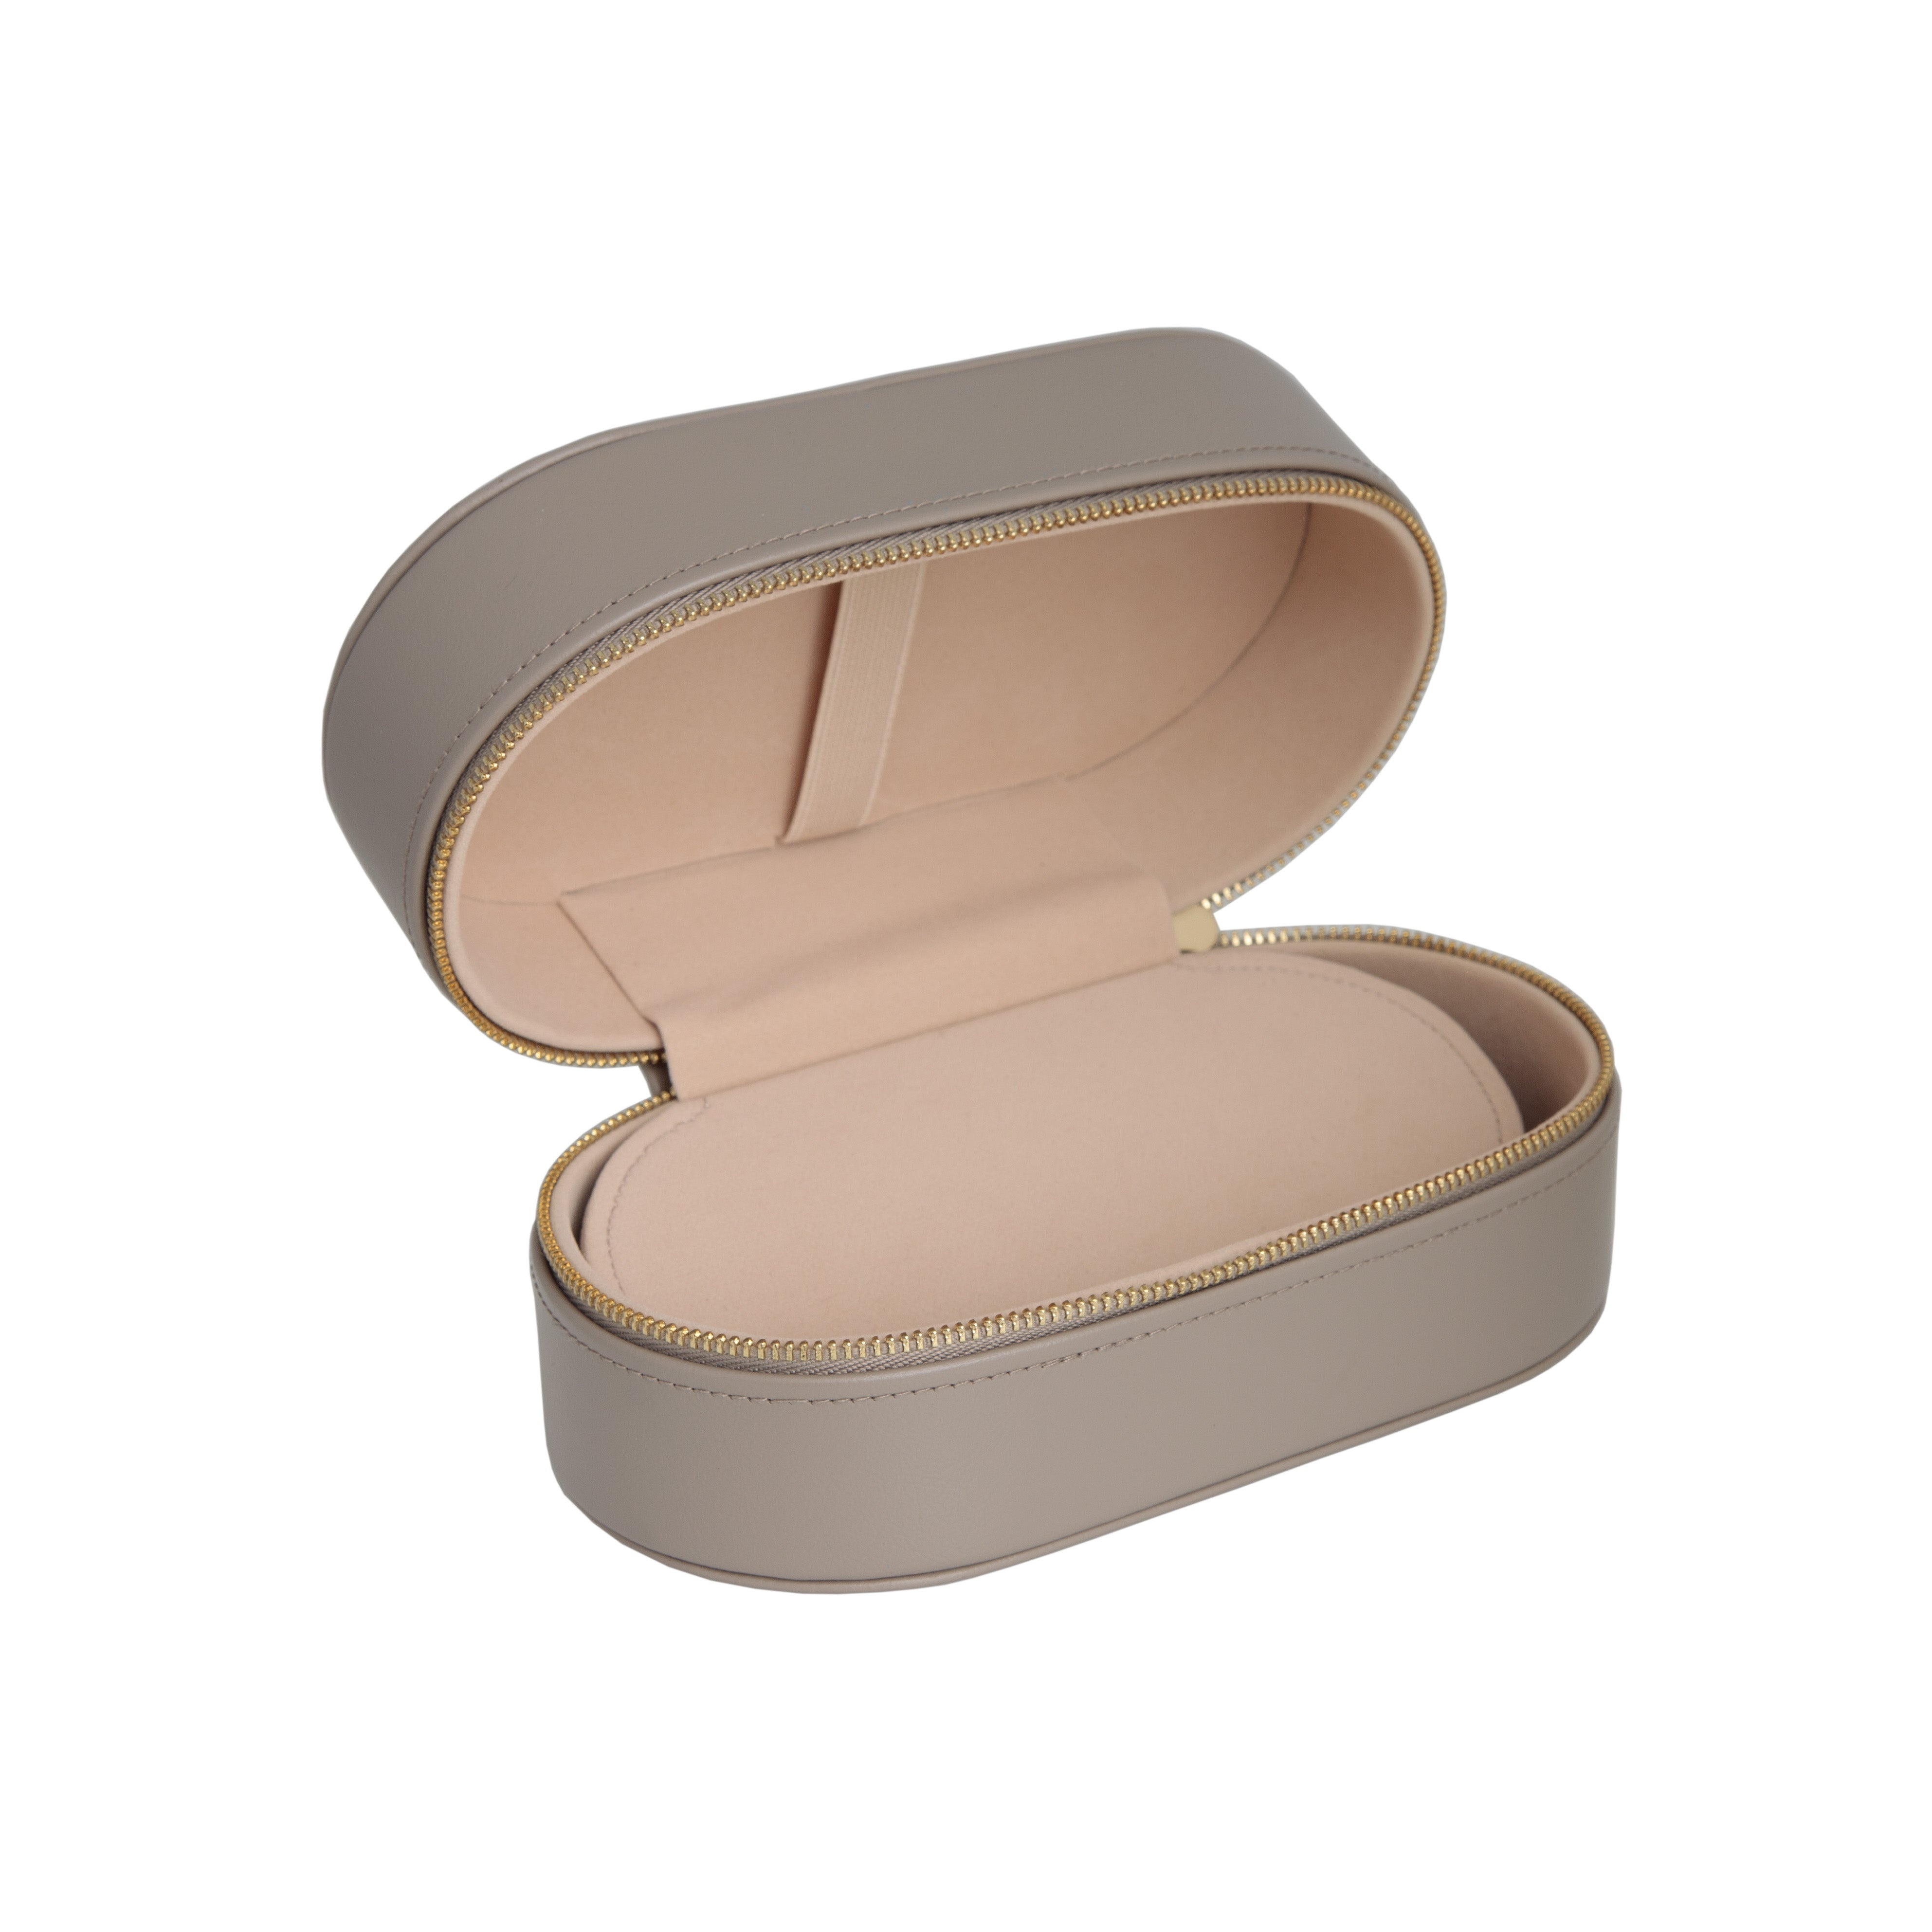 LINDA FARROW OVAL TRAVEL CASE IN TAUPE - 3